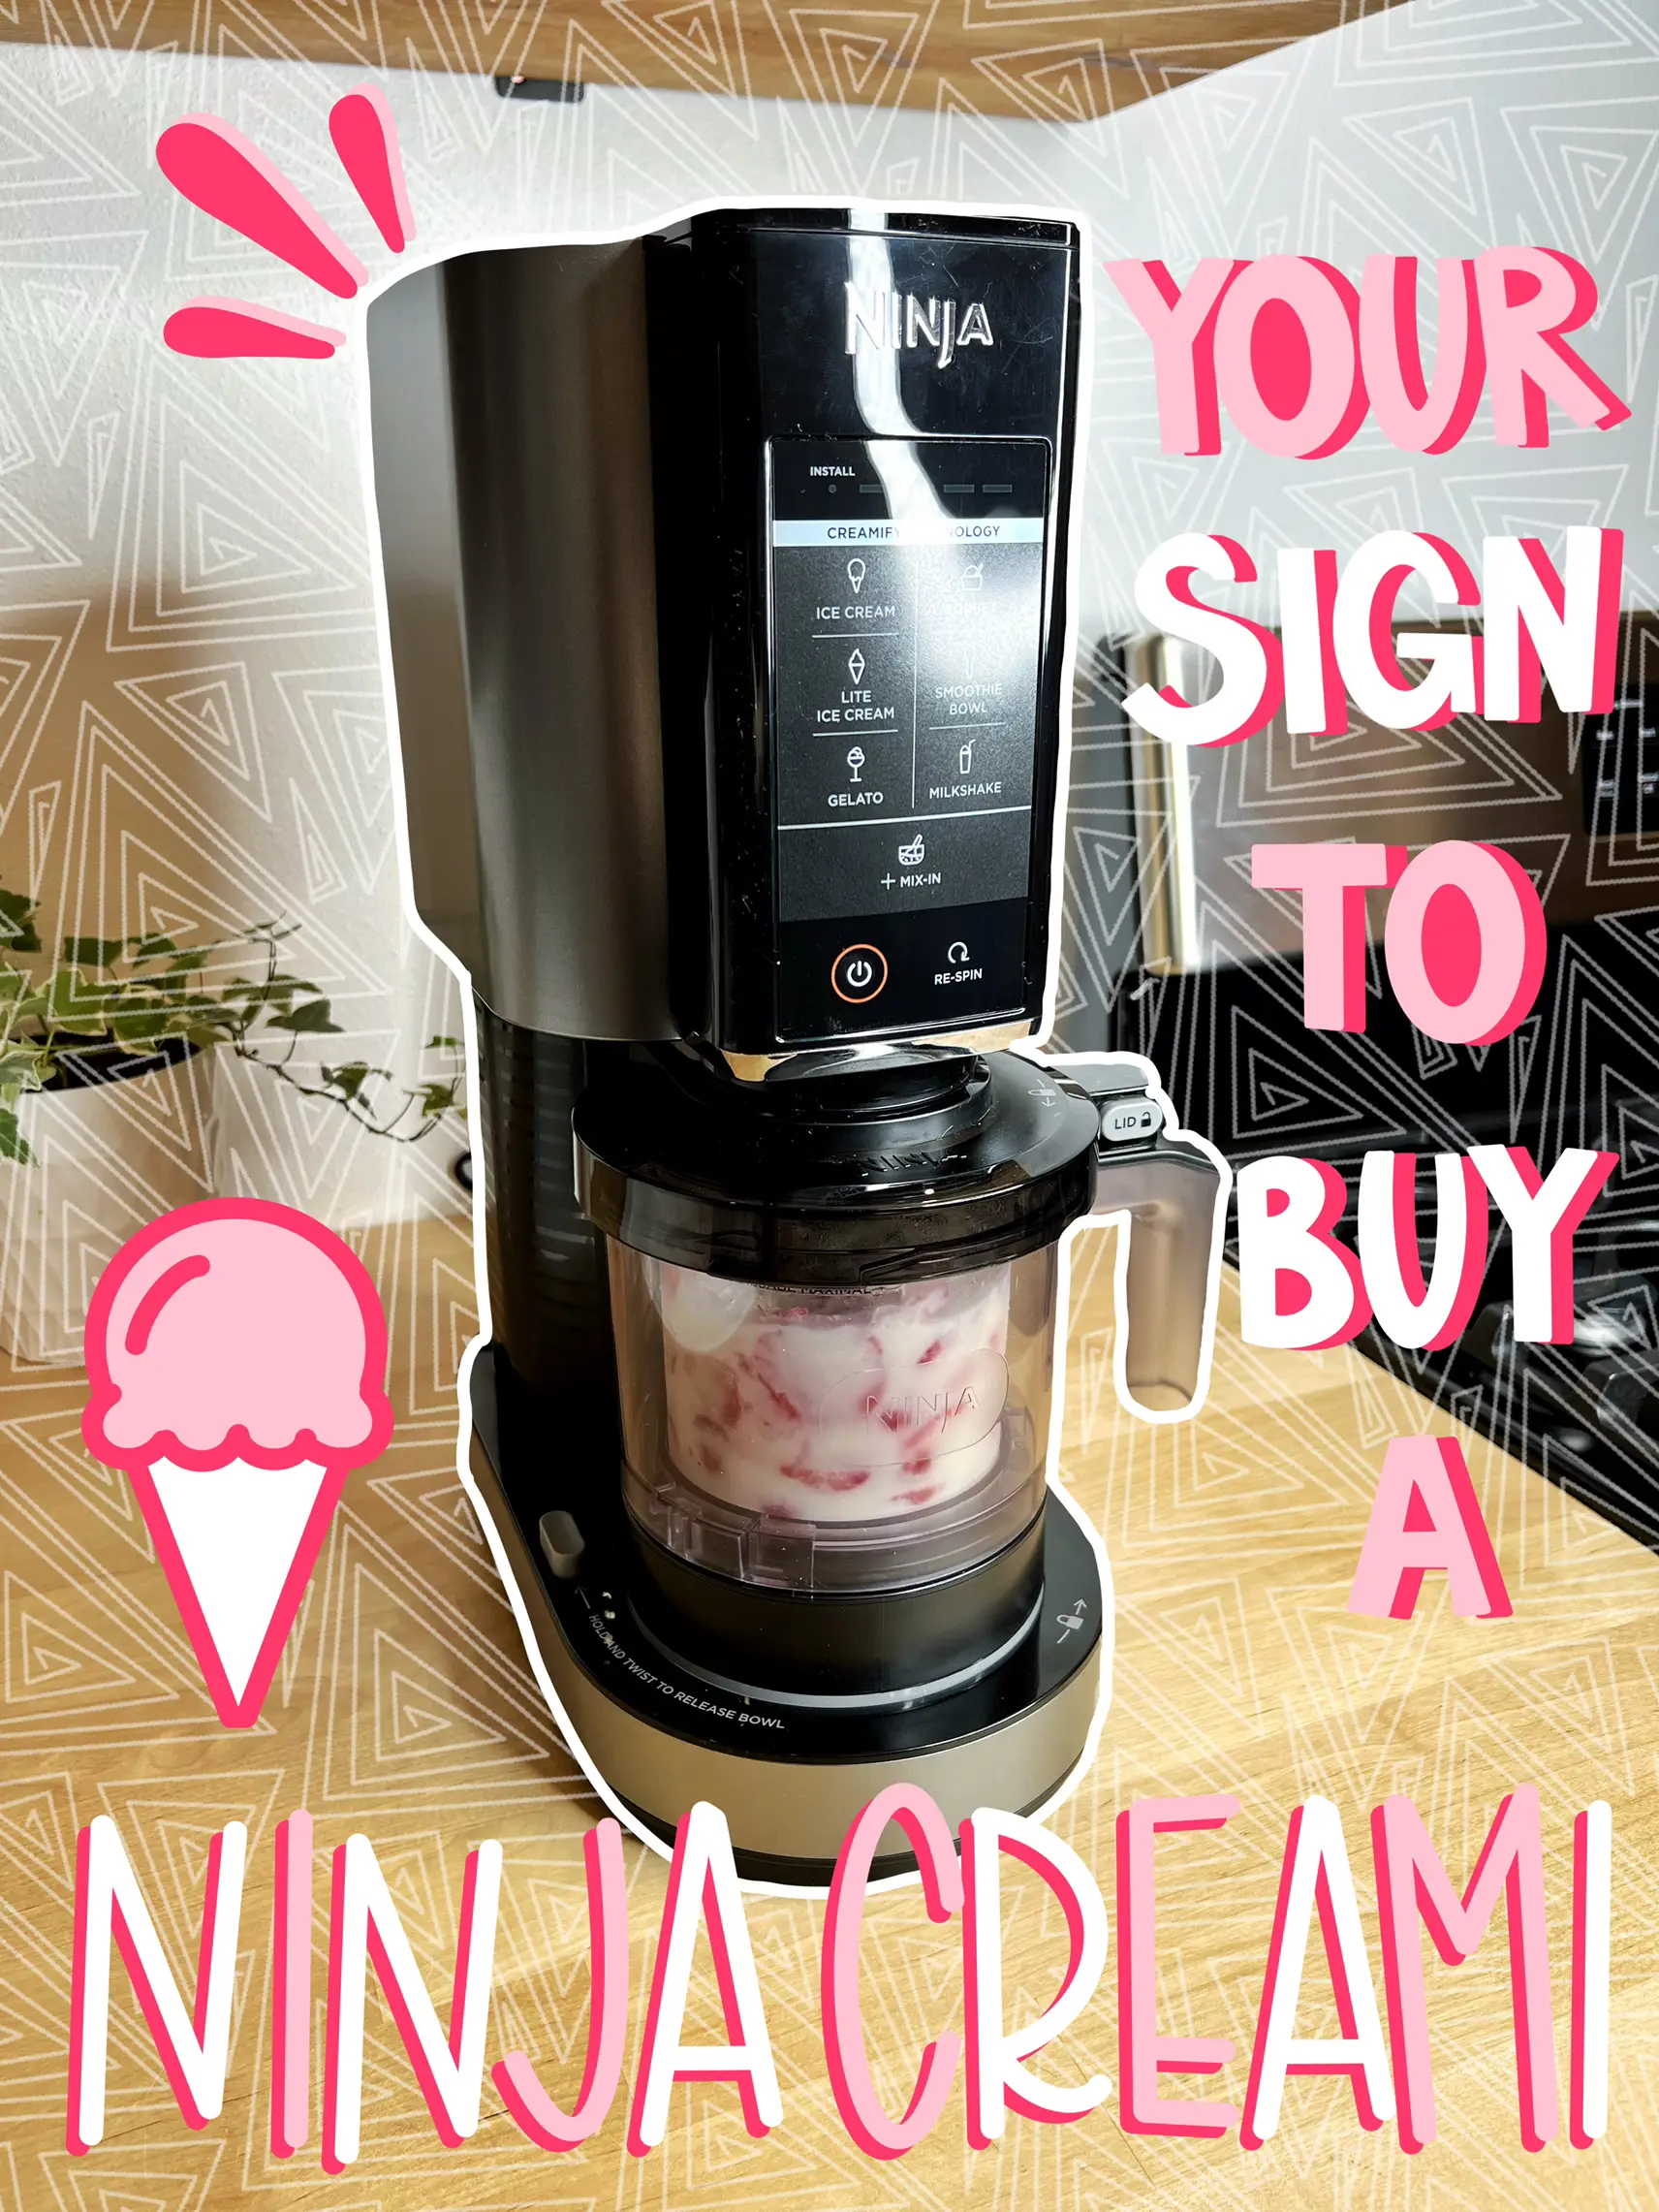 YOUR SIGN TO BUY A NINJA CREAMI🍦💞🍨, Video published by Kortney&Karlee